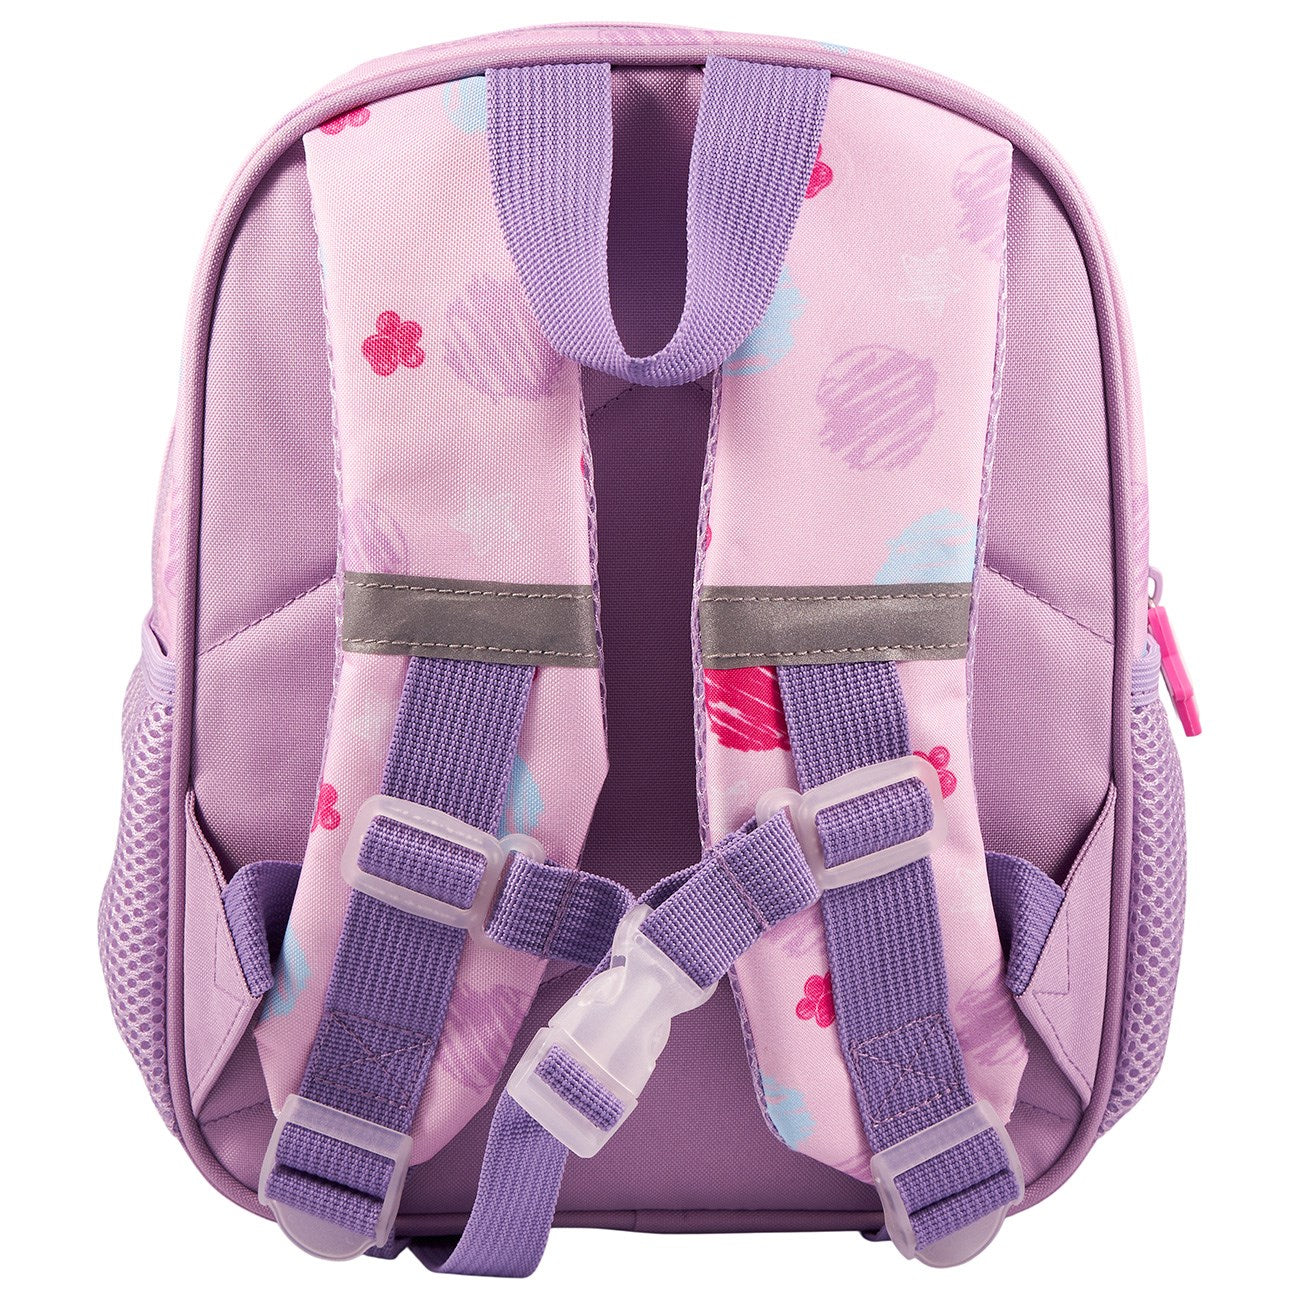 Euromic Paw Patrol Girls Pink Small Backpack 3